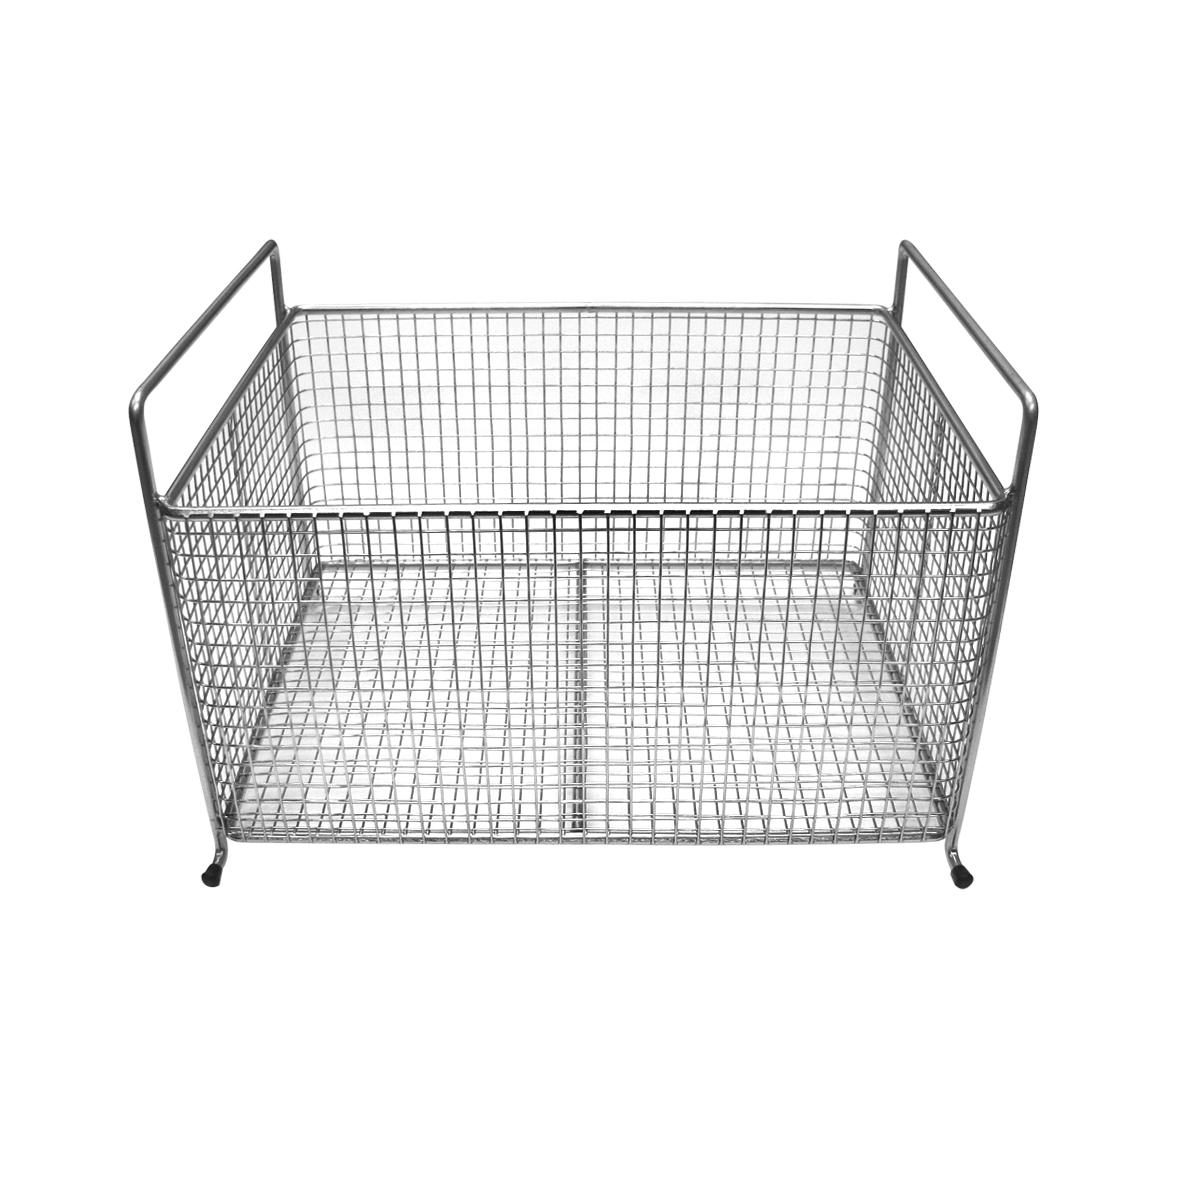 Standing basket, stainless steel, for Elma X-Tra 70